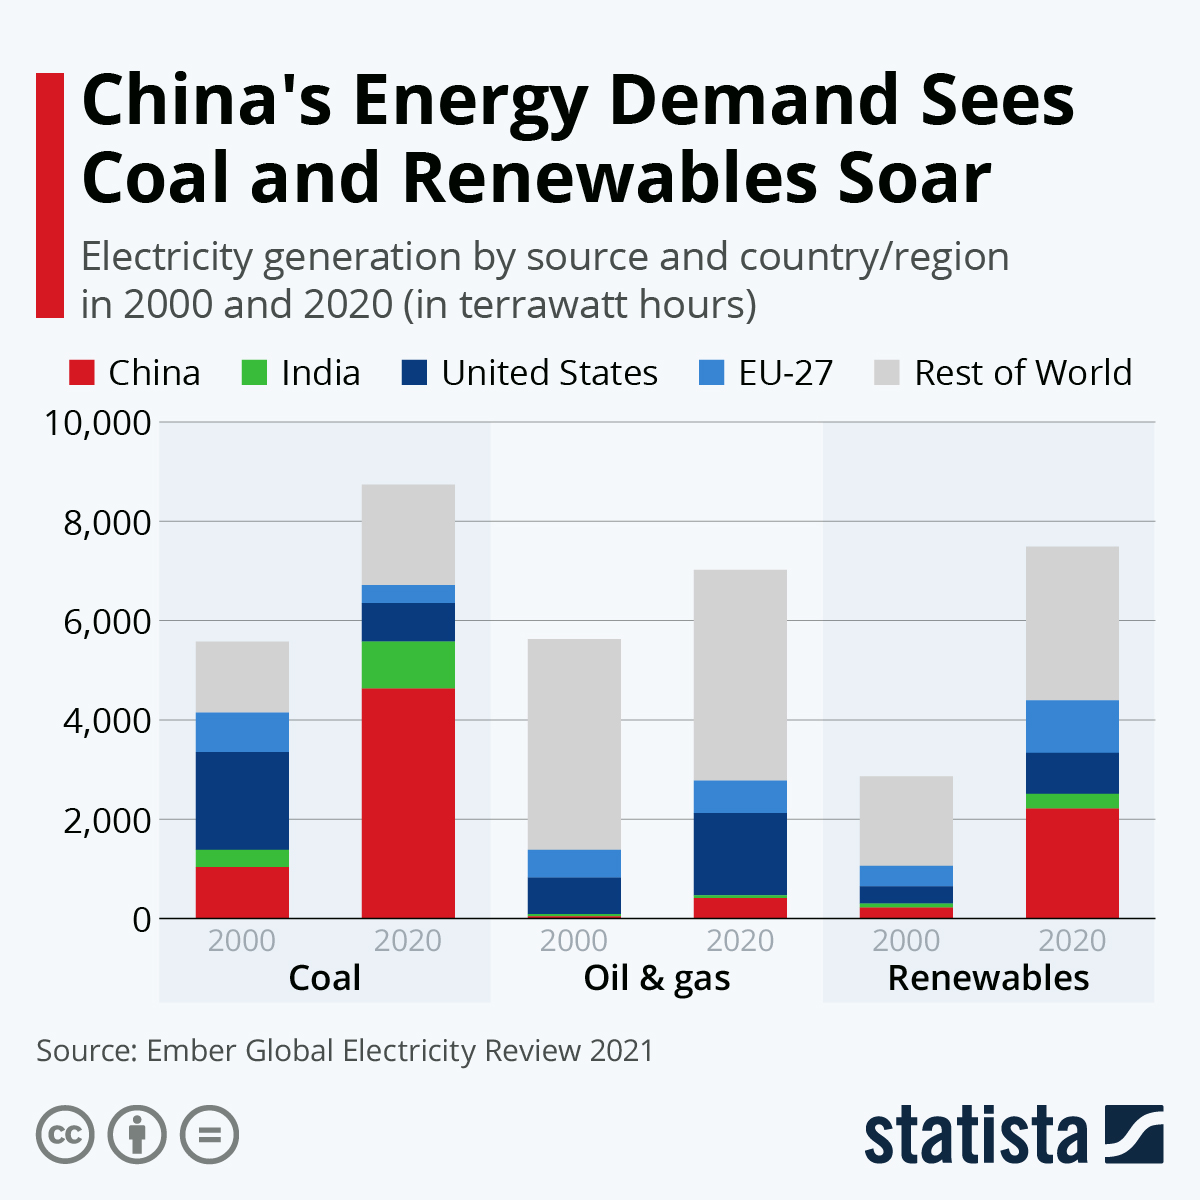 China's Energy Demand Sees Coal and Renewables Soar